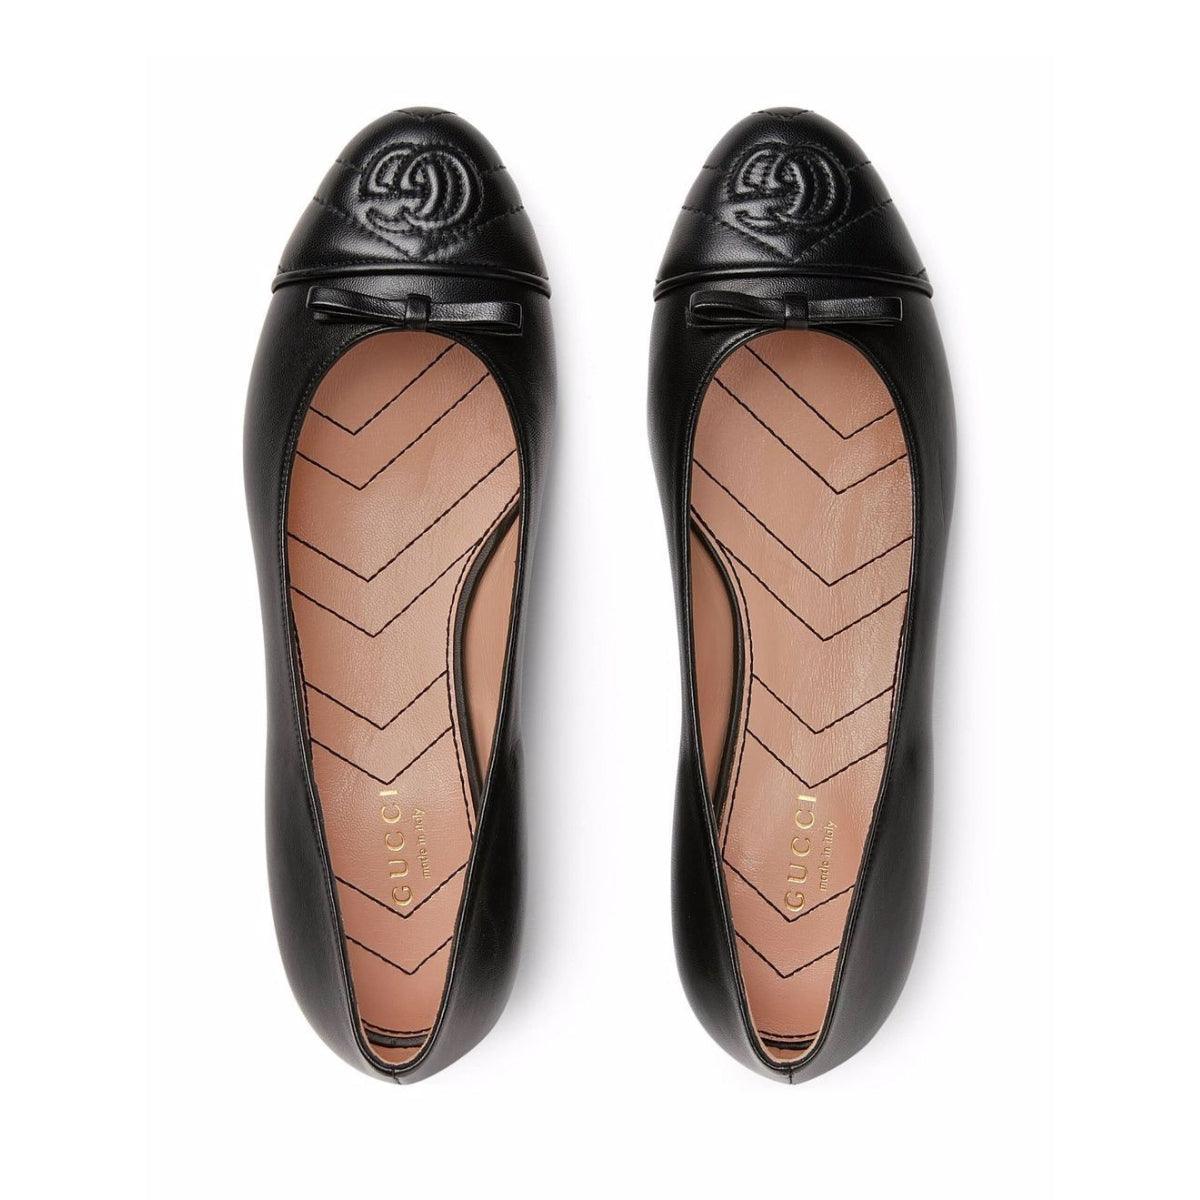  GucciGG Ballerina Leather Shoes - Runway Catalog